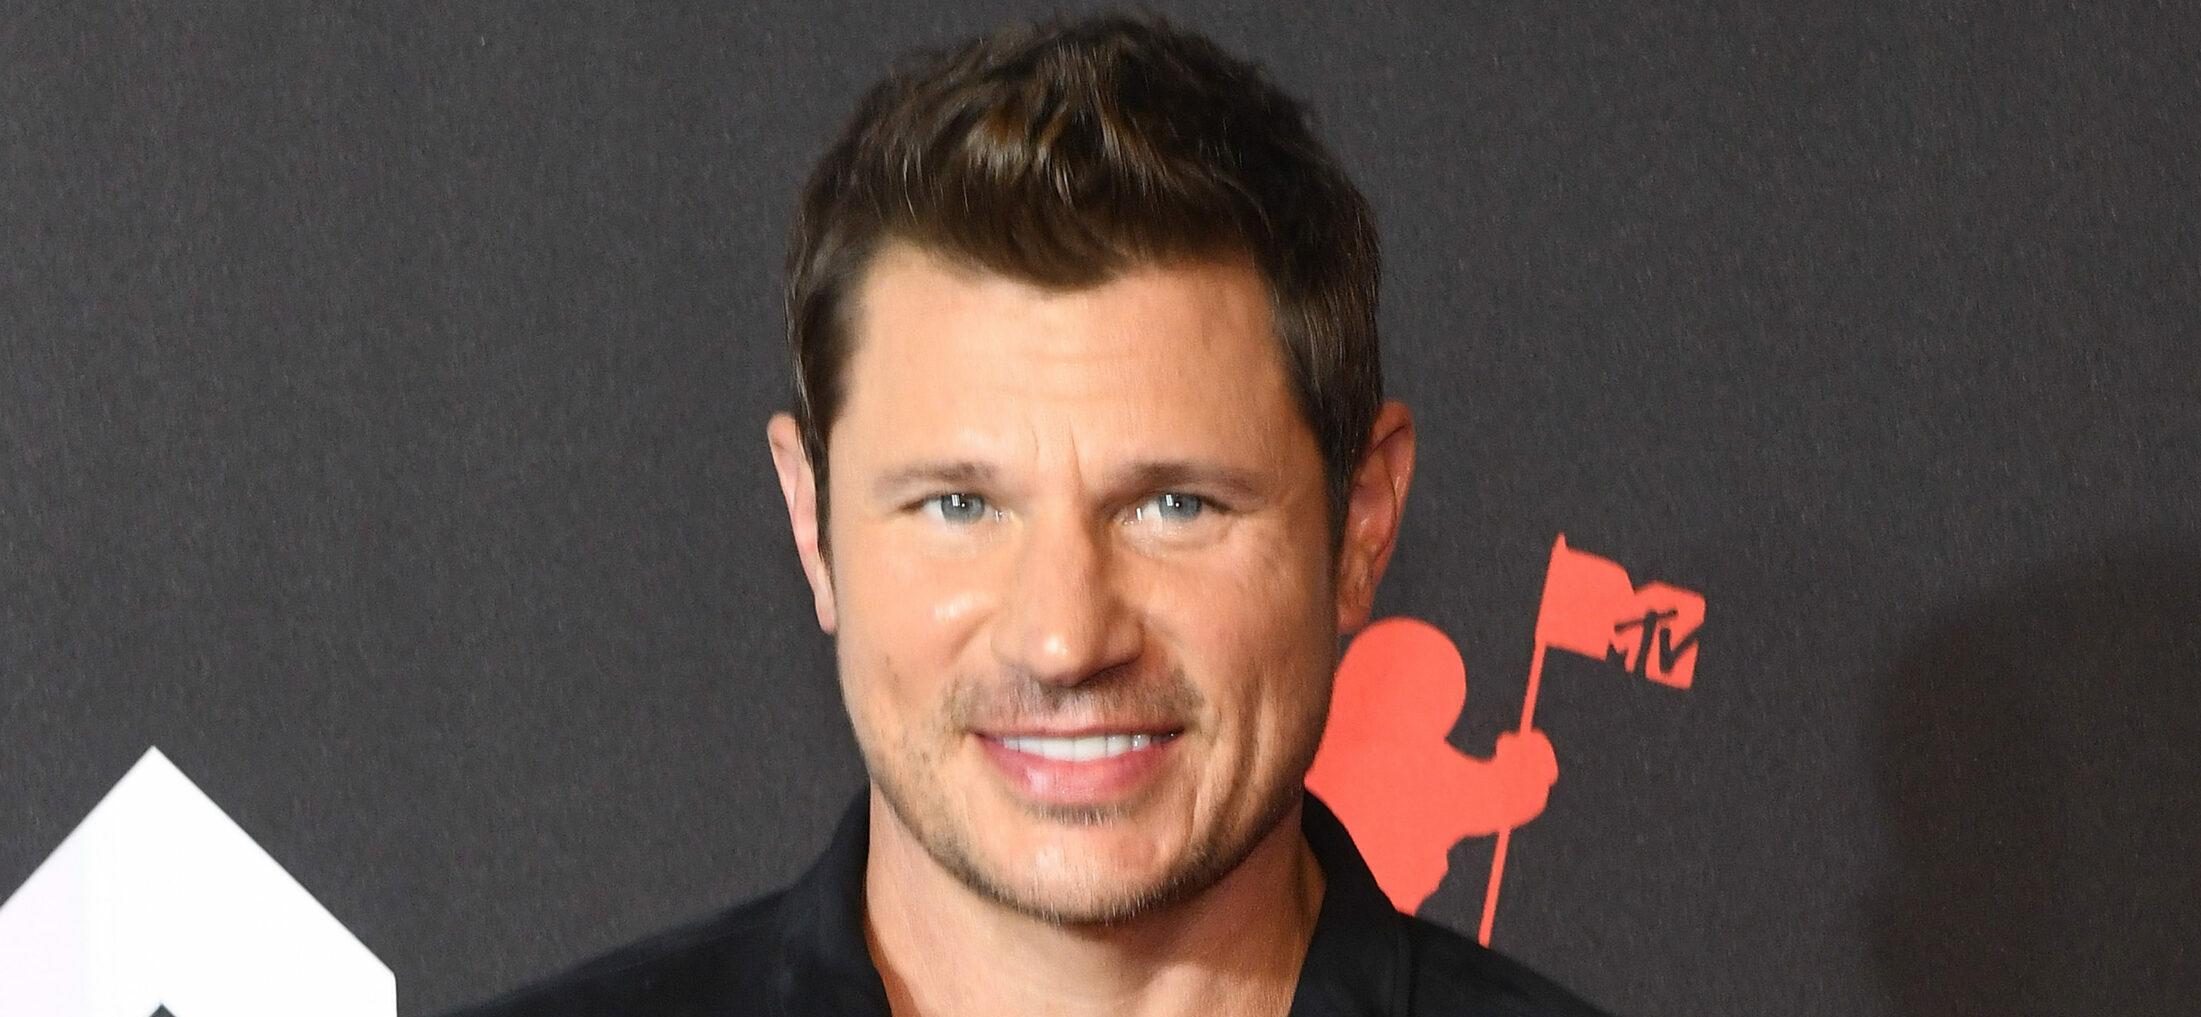 Nick Lachey at the 2021 MTV Video Music Awards - Arrivals